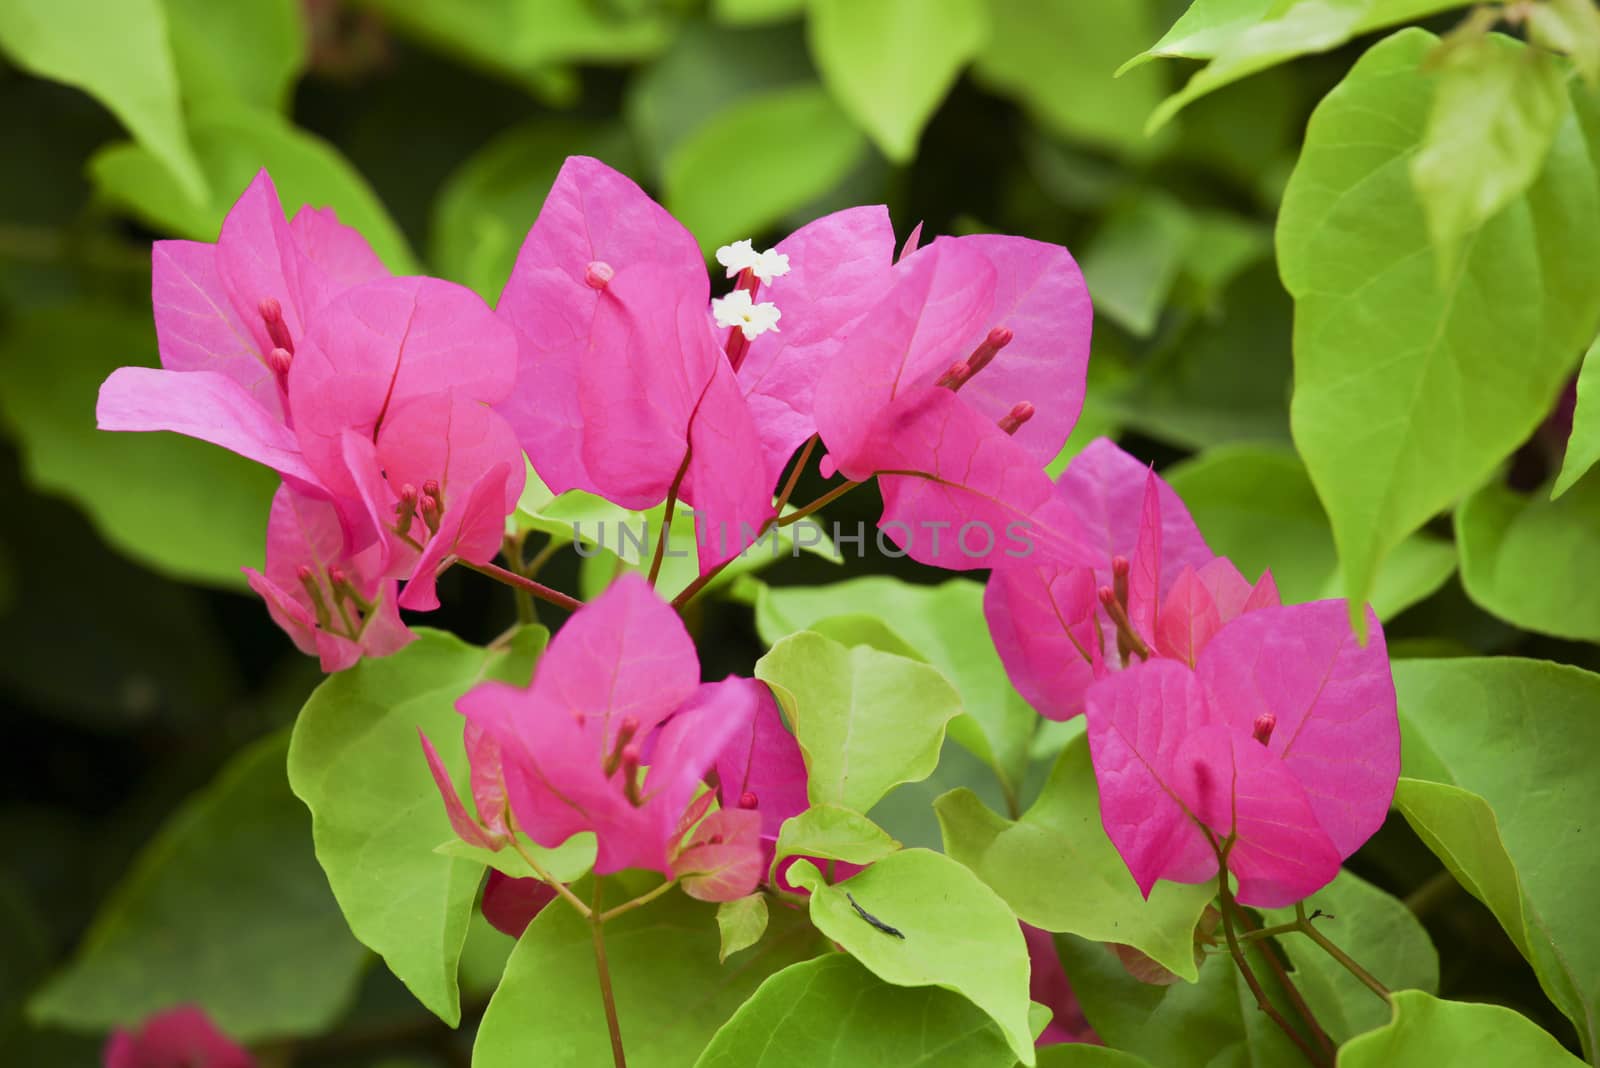 Pink Bougainvillea flowers on the branch was taken in nature.